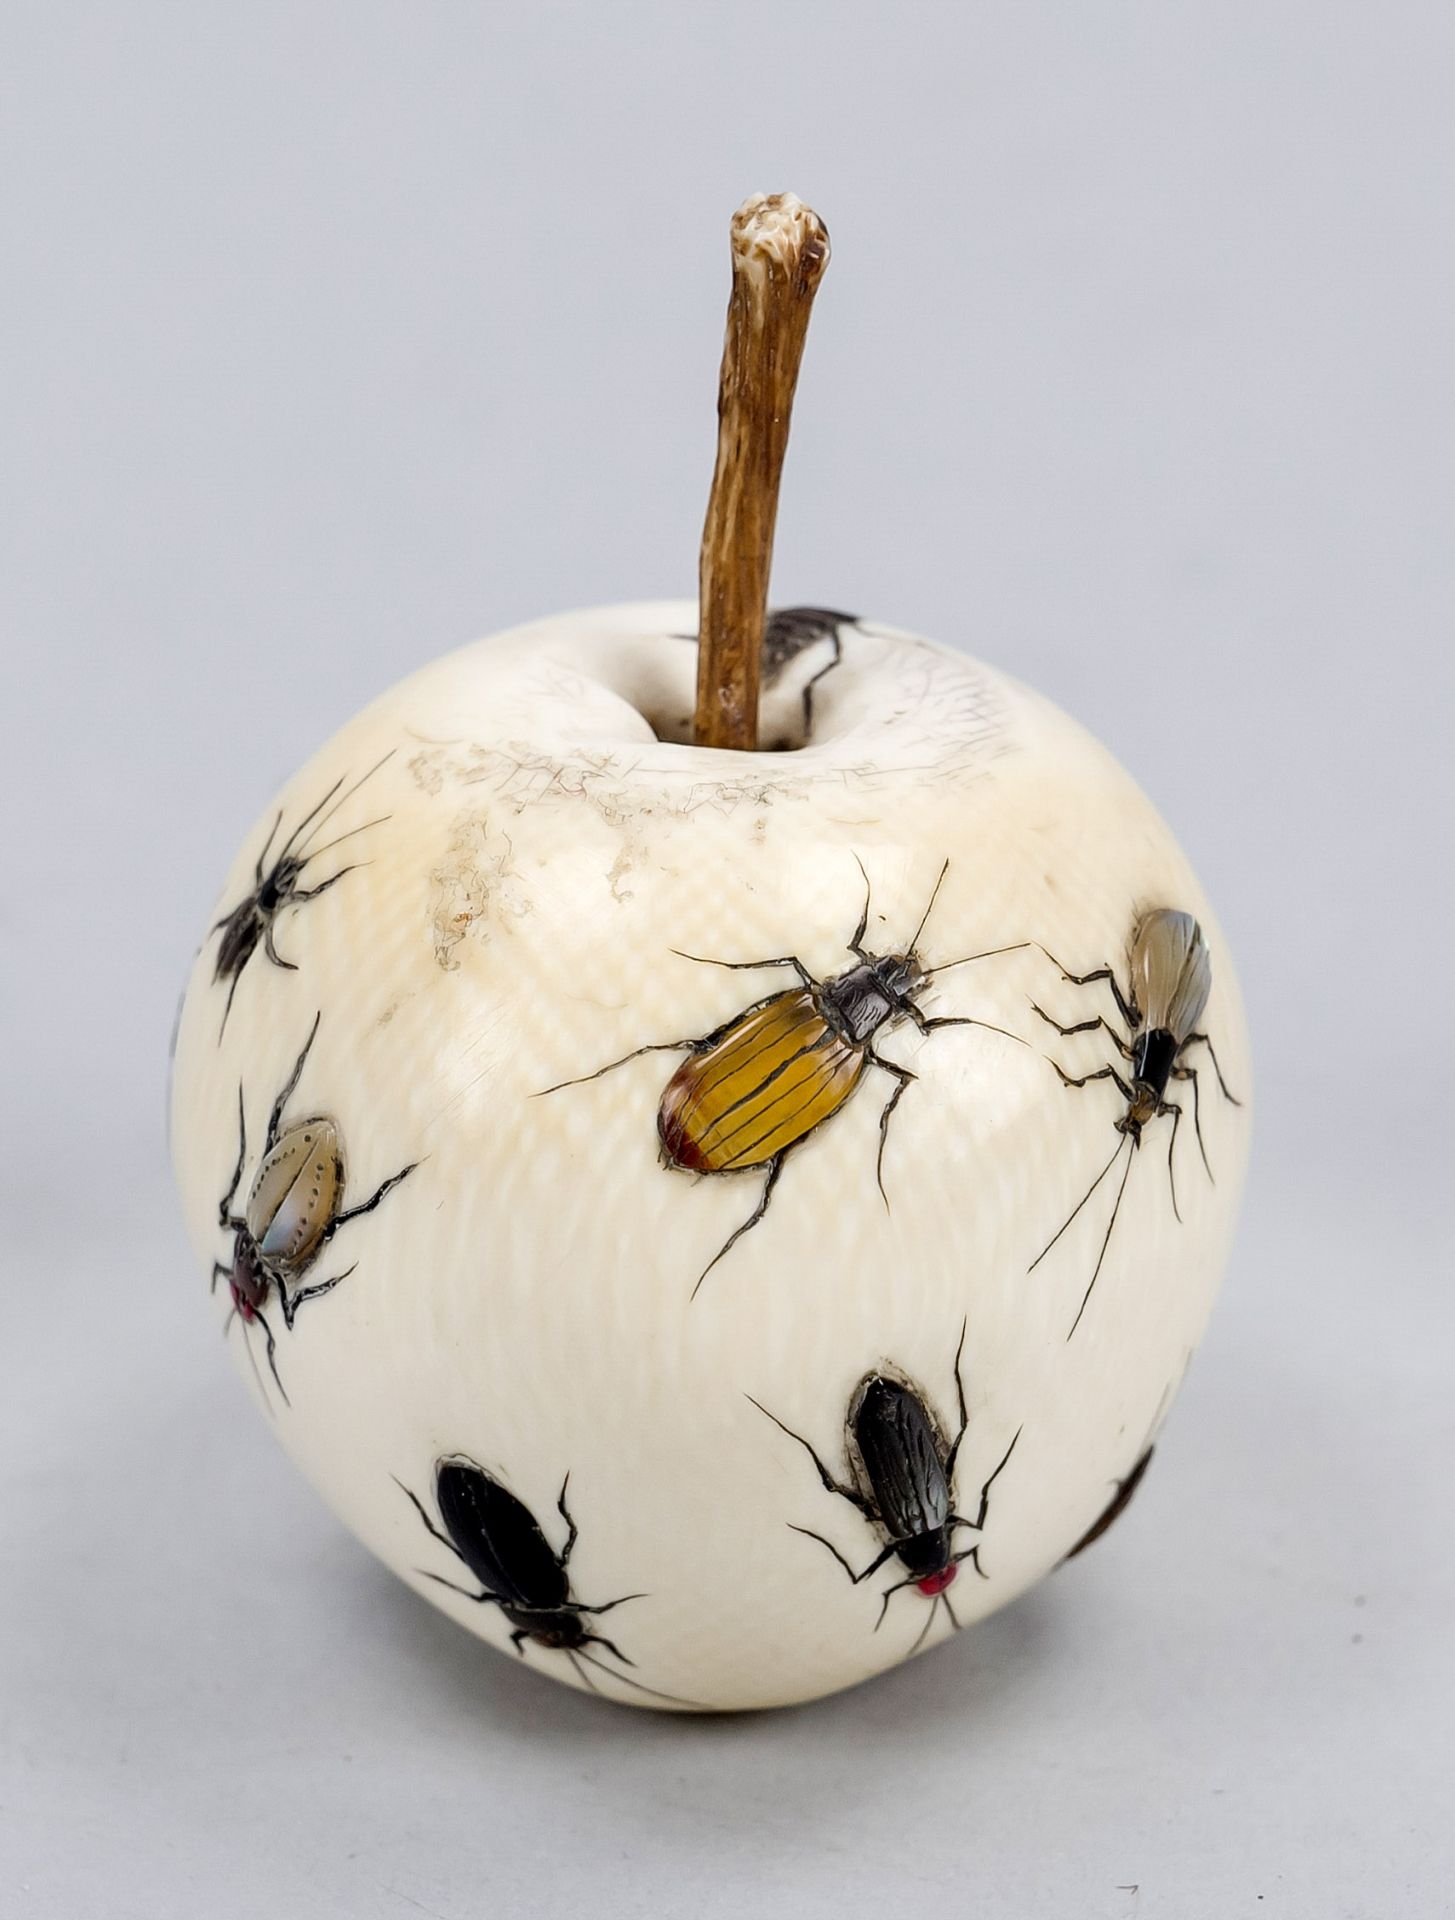 Shibayama Okimono as an apple, Japan c. 1900 (Meiji), ivory with mother-of-pearl and stone inlays.